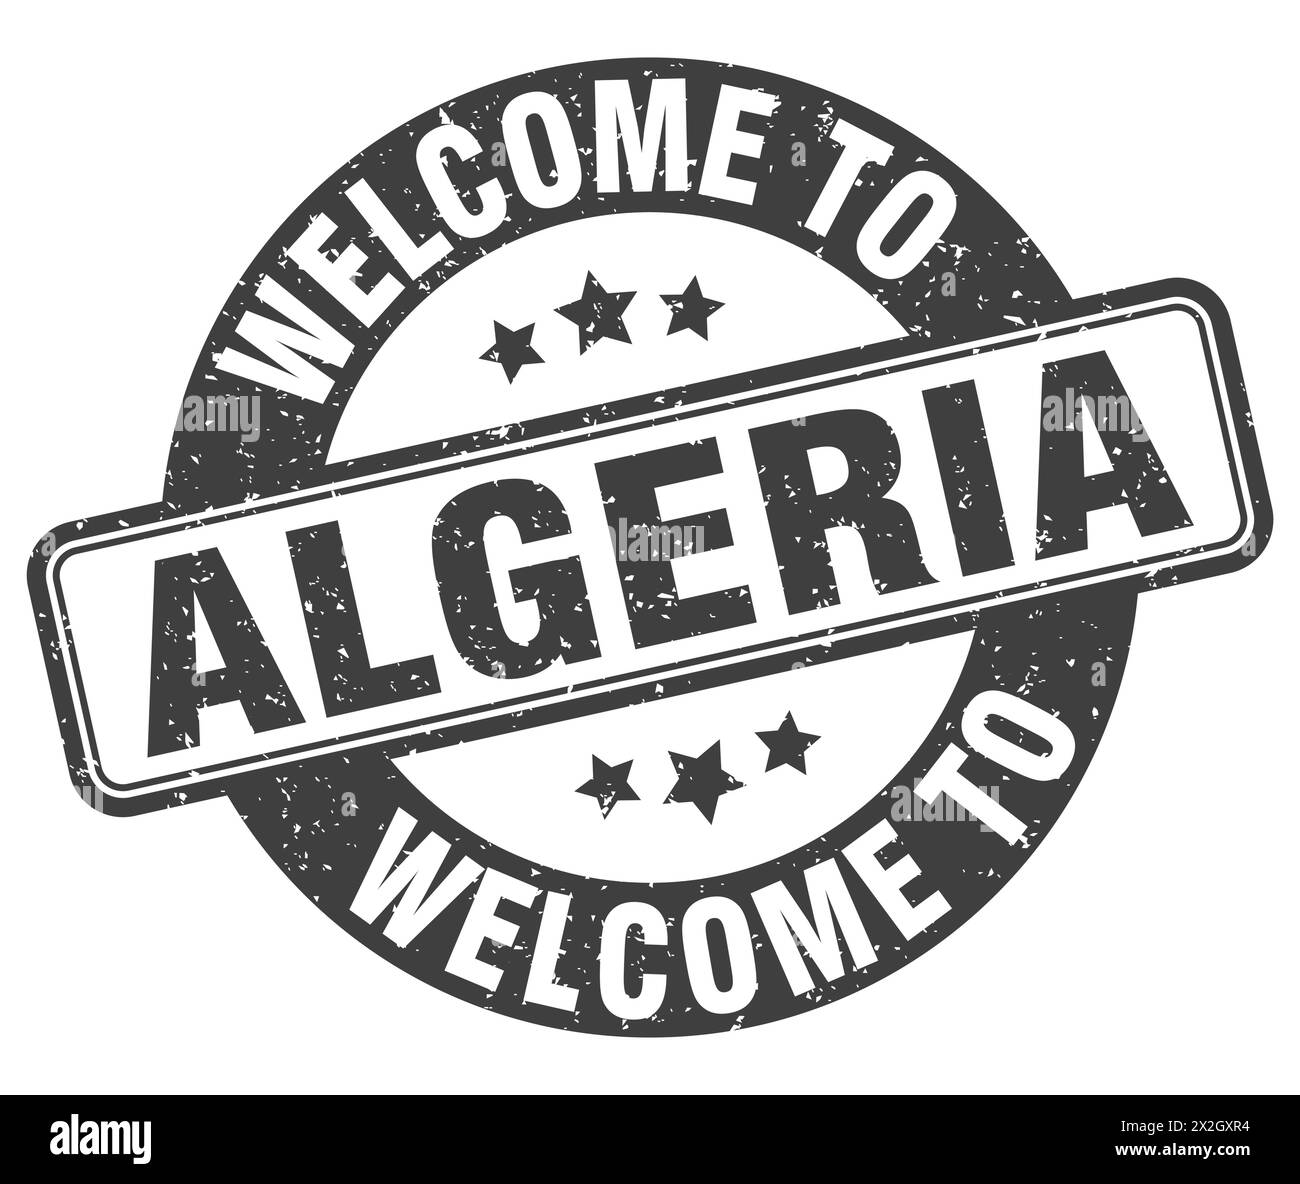 Welcome to Algeria stamp. Algeria round sign isolated on white background Stock Vector